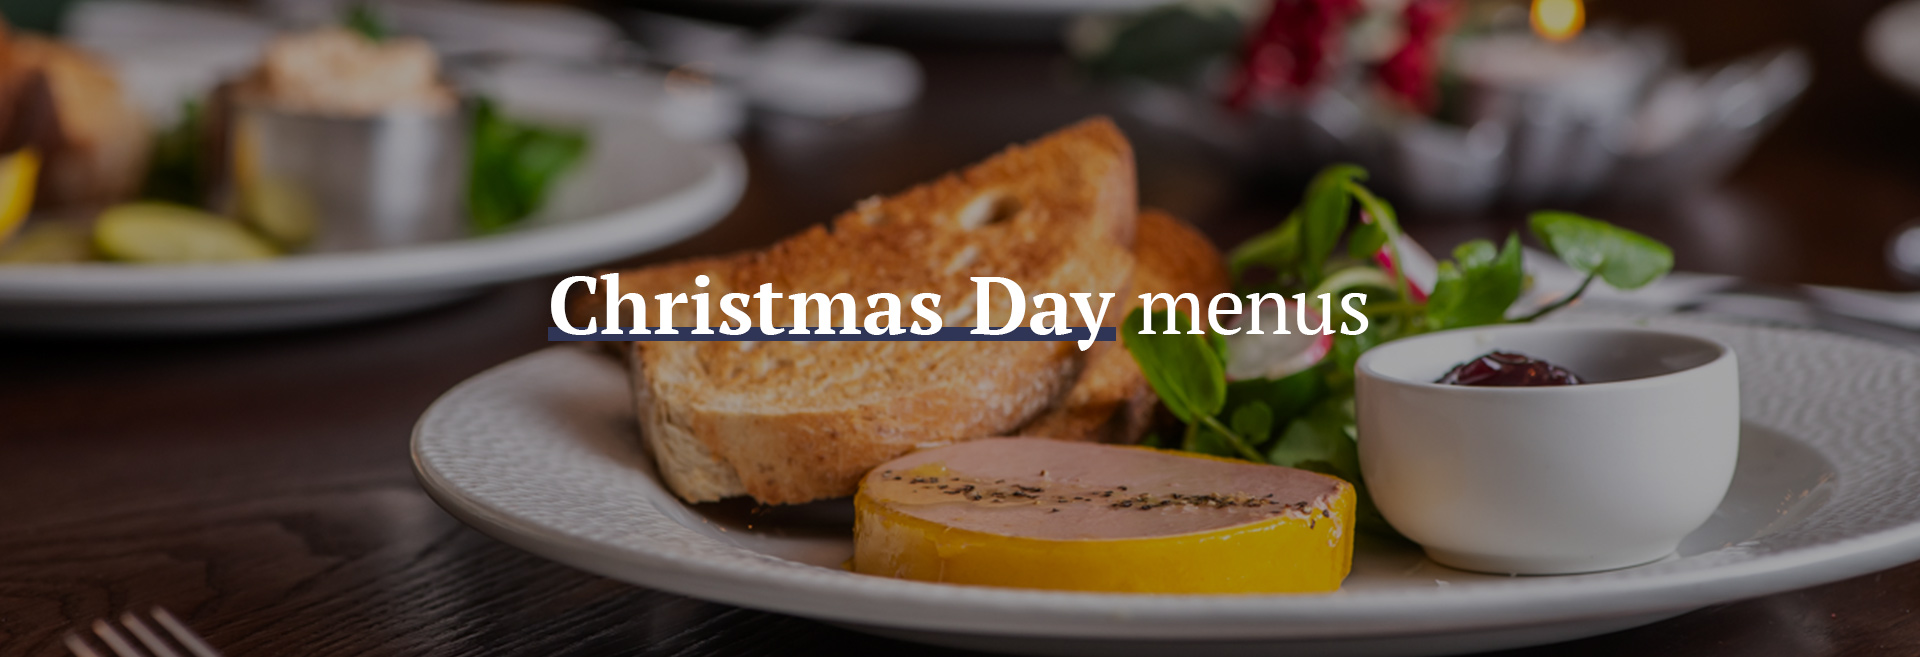 Christmas Day Menu at The Marquis of Granby